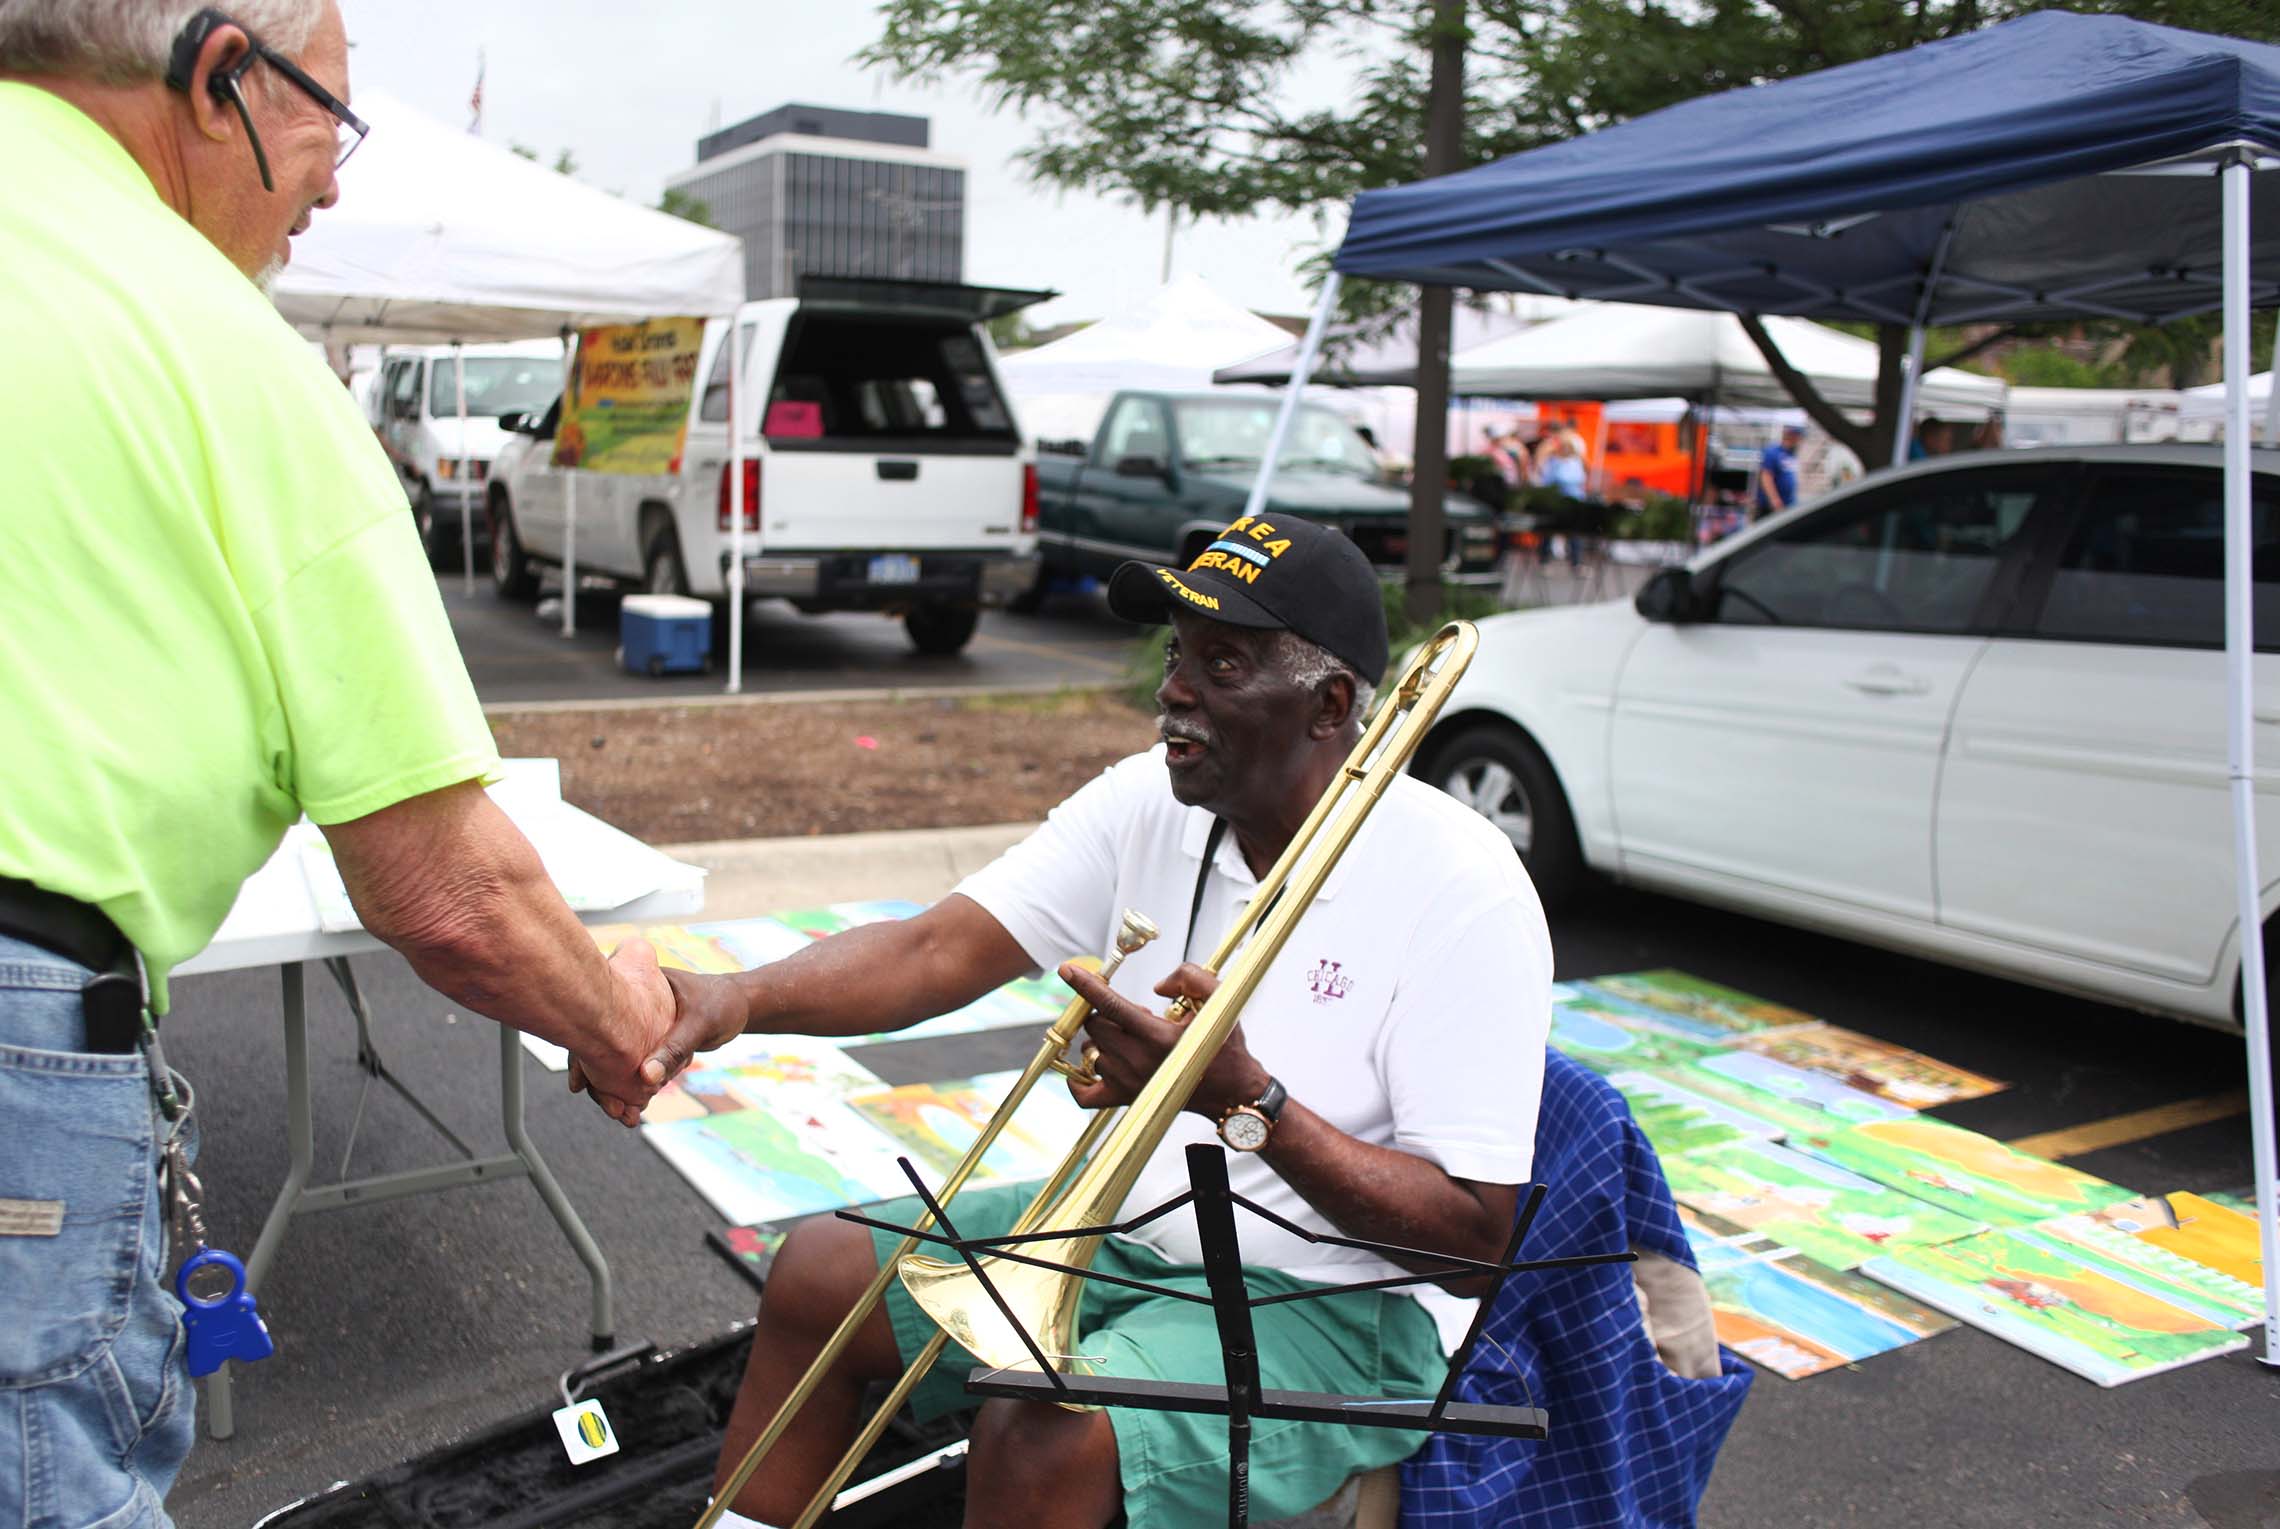  Willie Dixon, right, of Kankakee, shakes a viewers hand Saturday during the Kankakee Farmers Market in downtown Kankakee. Dixon sells his original paintings and plays the trombone for passers by. 